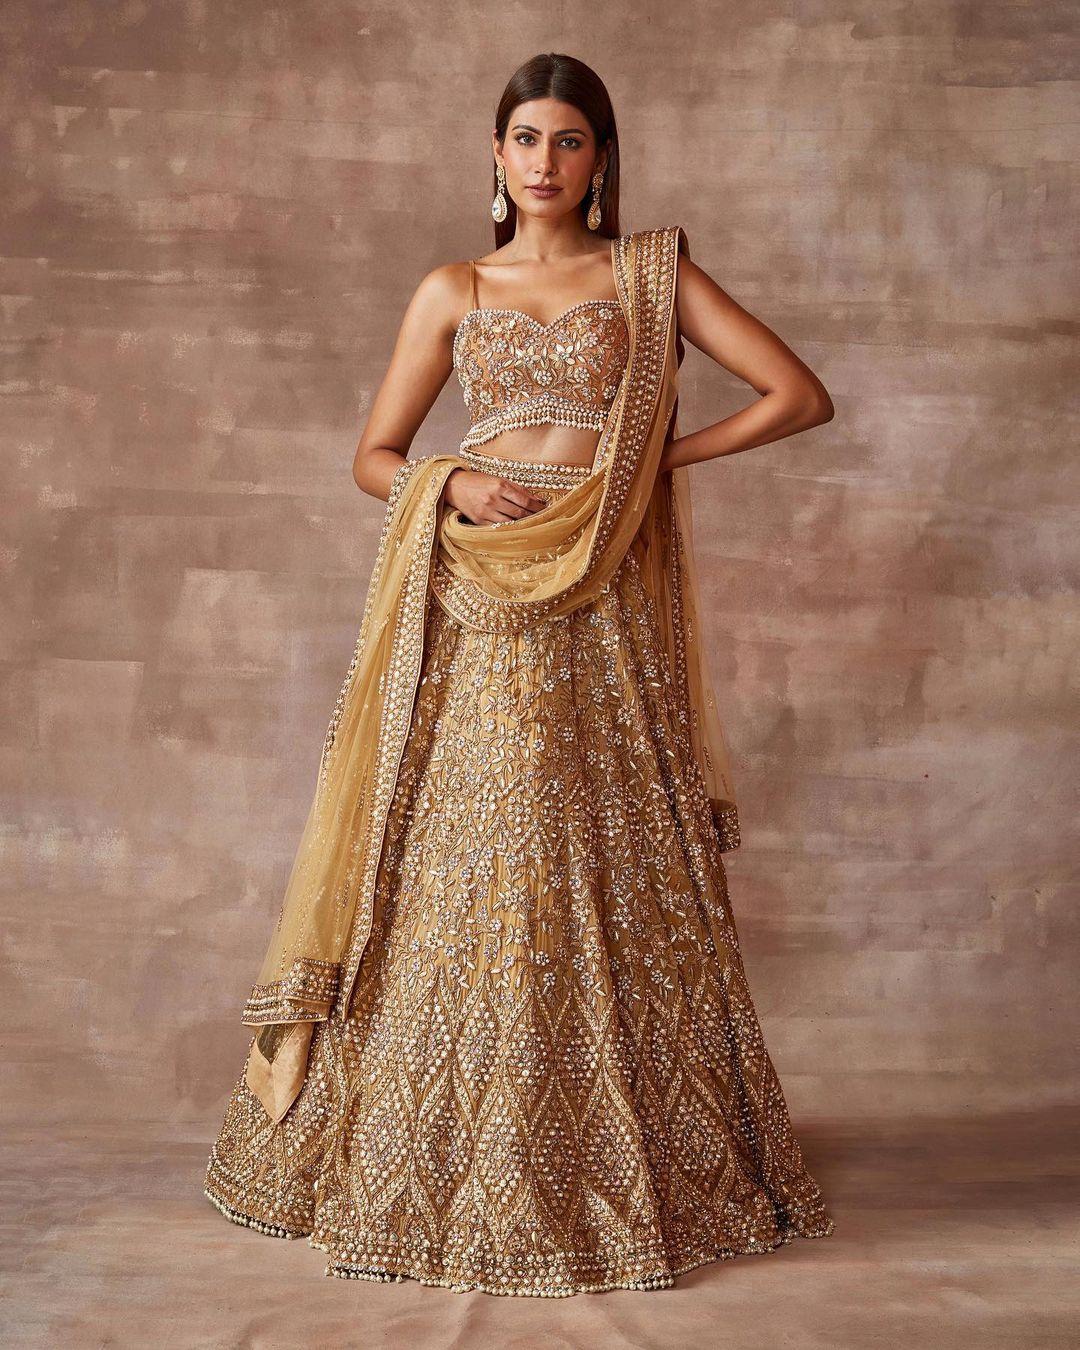 What to wear for an Indian Wedding as a Guest?